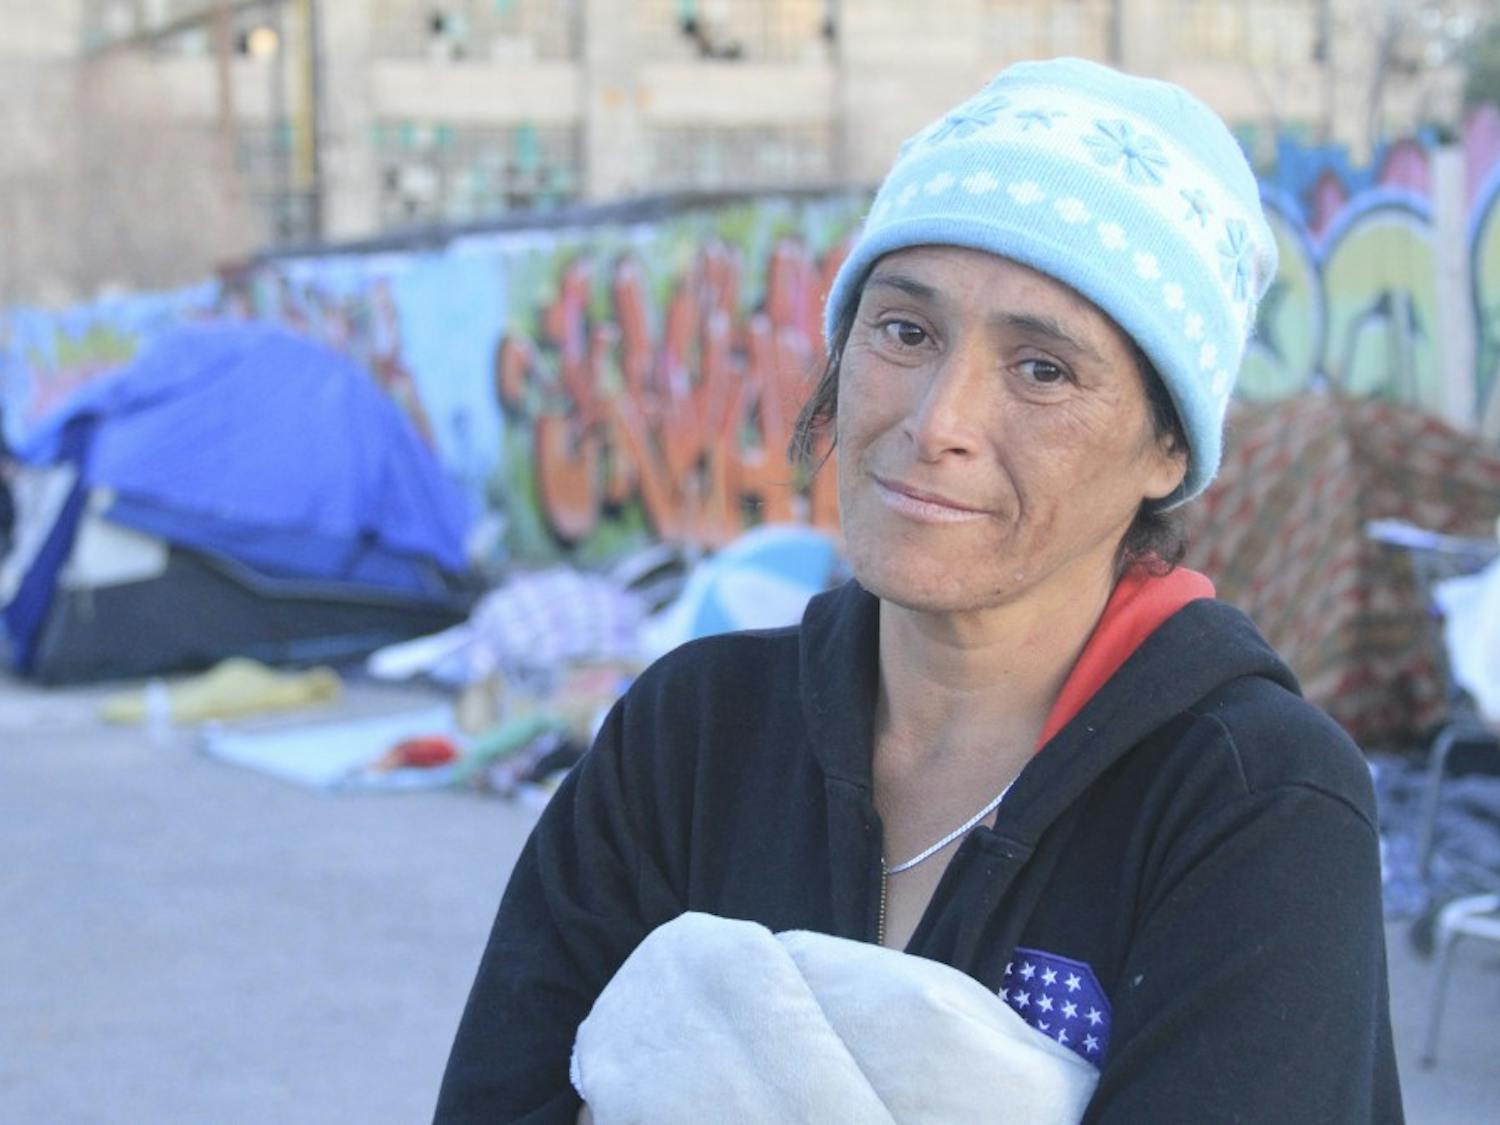 Kimberly Gallegos, also known as Wondercat, grew up in the Barelas neighborhood. She now lives in Camp Faith, located at Second Street and Santa Fe Avenue.